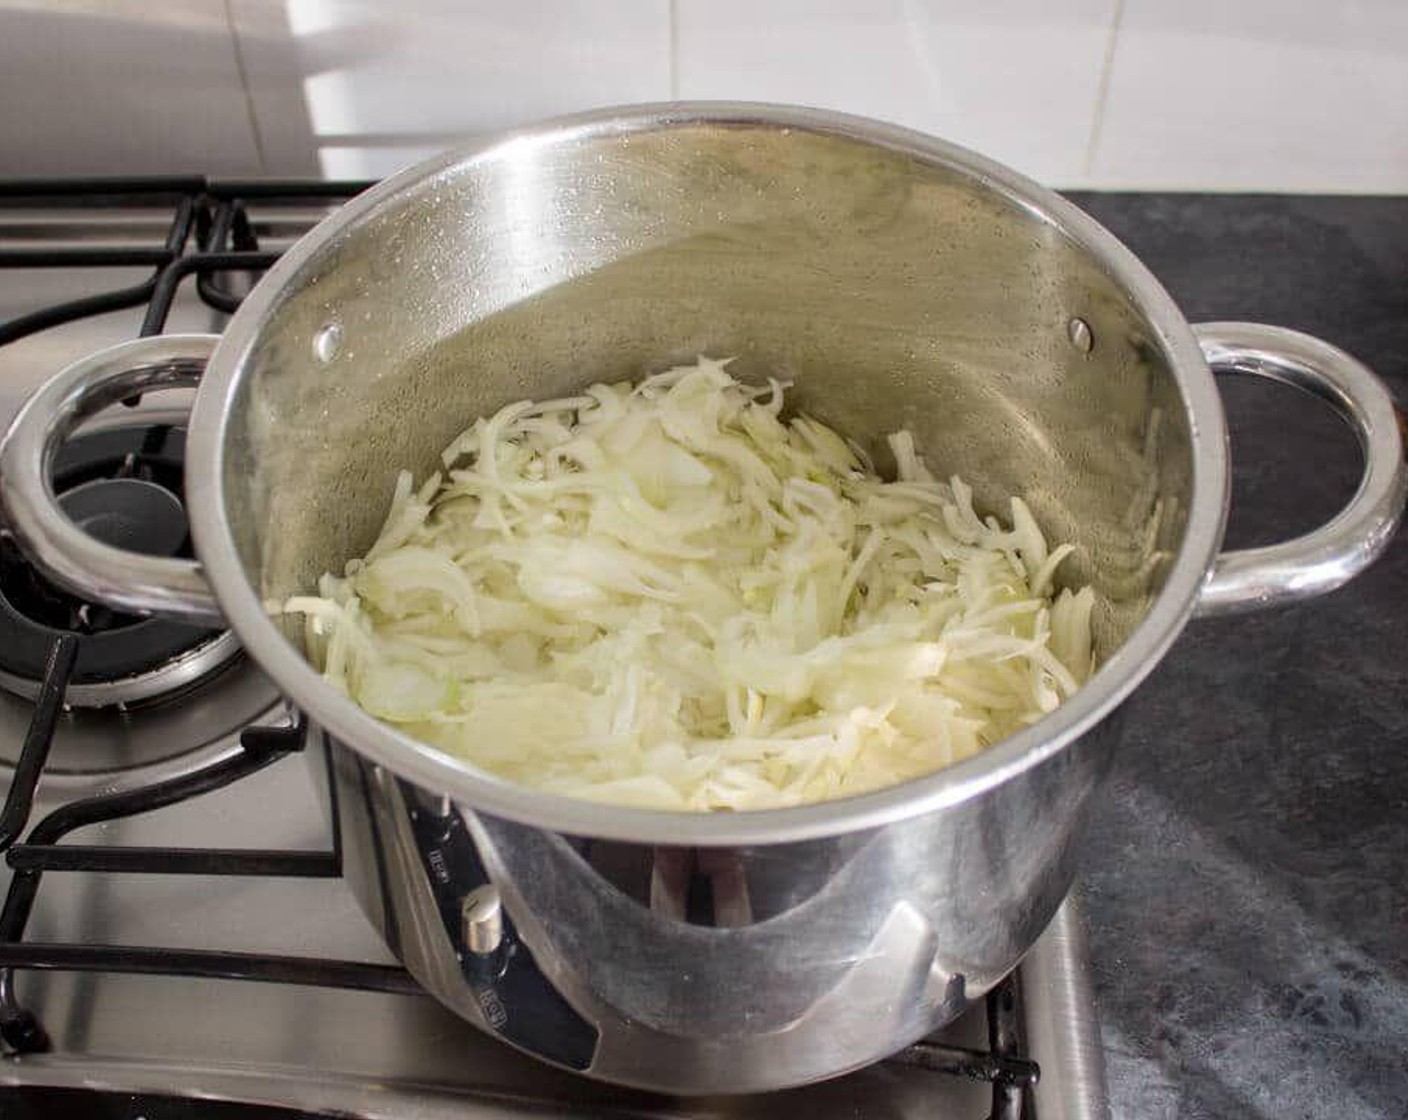 step 1 Take your large pot and place over a medium heat. Add in the Butter (3 Tbsp). When melted, tip in all the Onions (5 cups) and give it a stir.